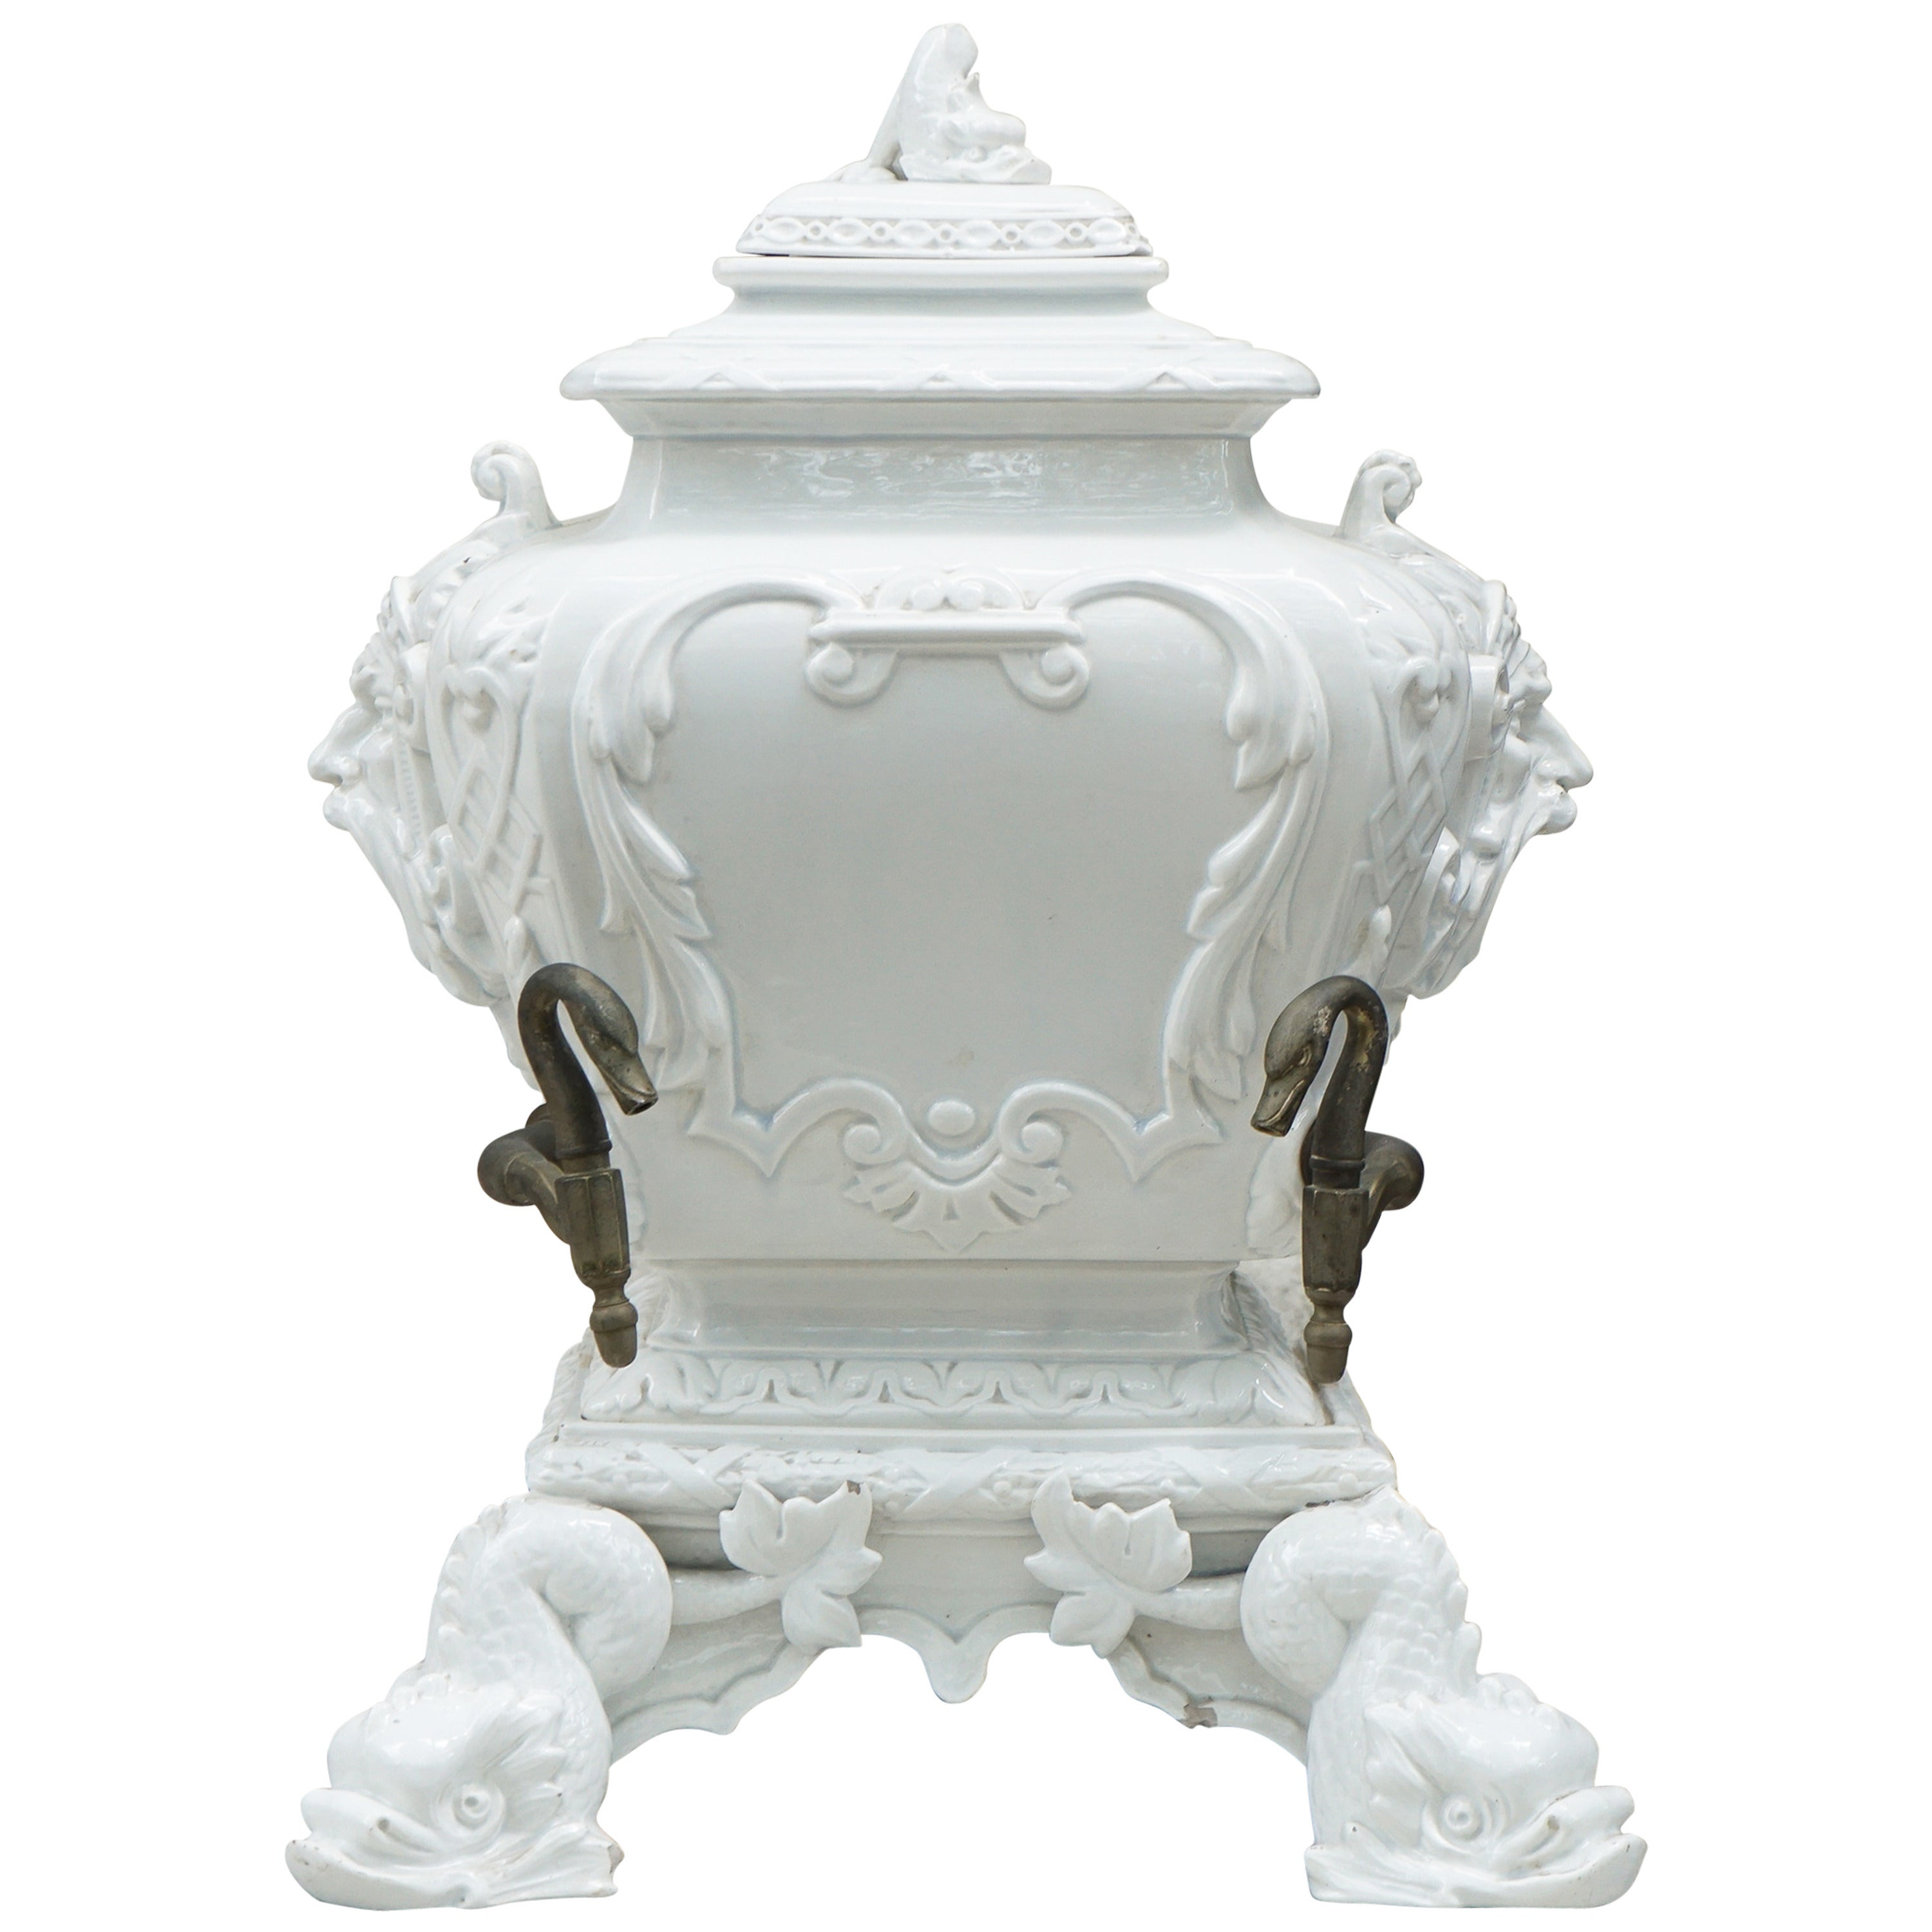 Late 19th Century French Blanca de Chine Fountain or Lava Bowl